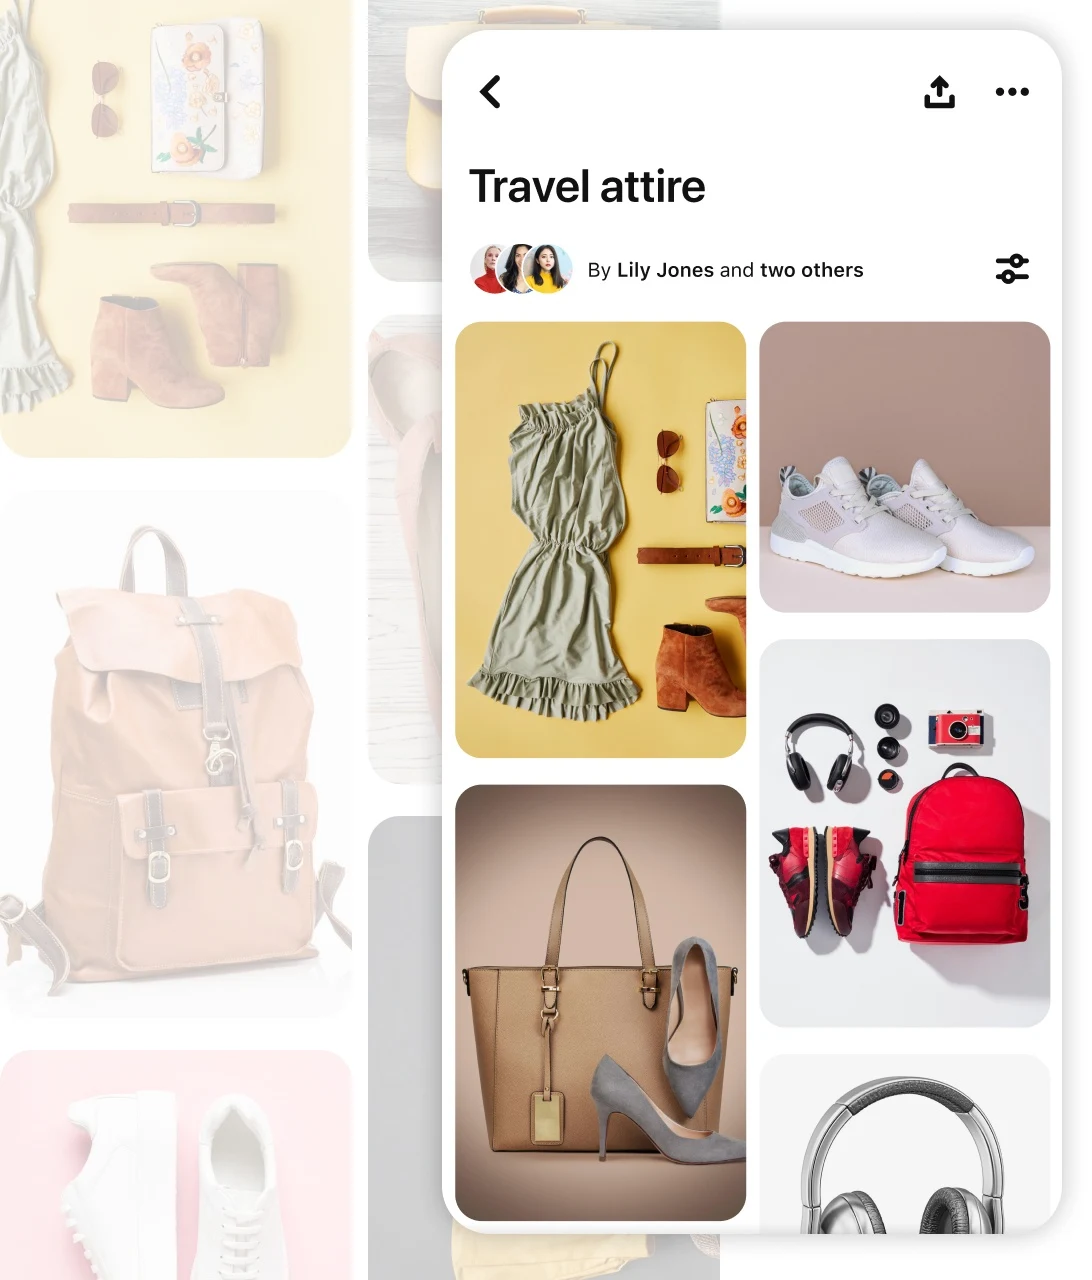 Pin grid with a board titled "travel attire" including bags, shoes and headphones